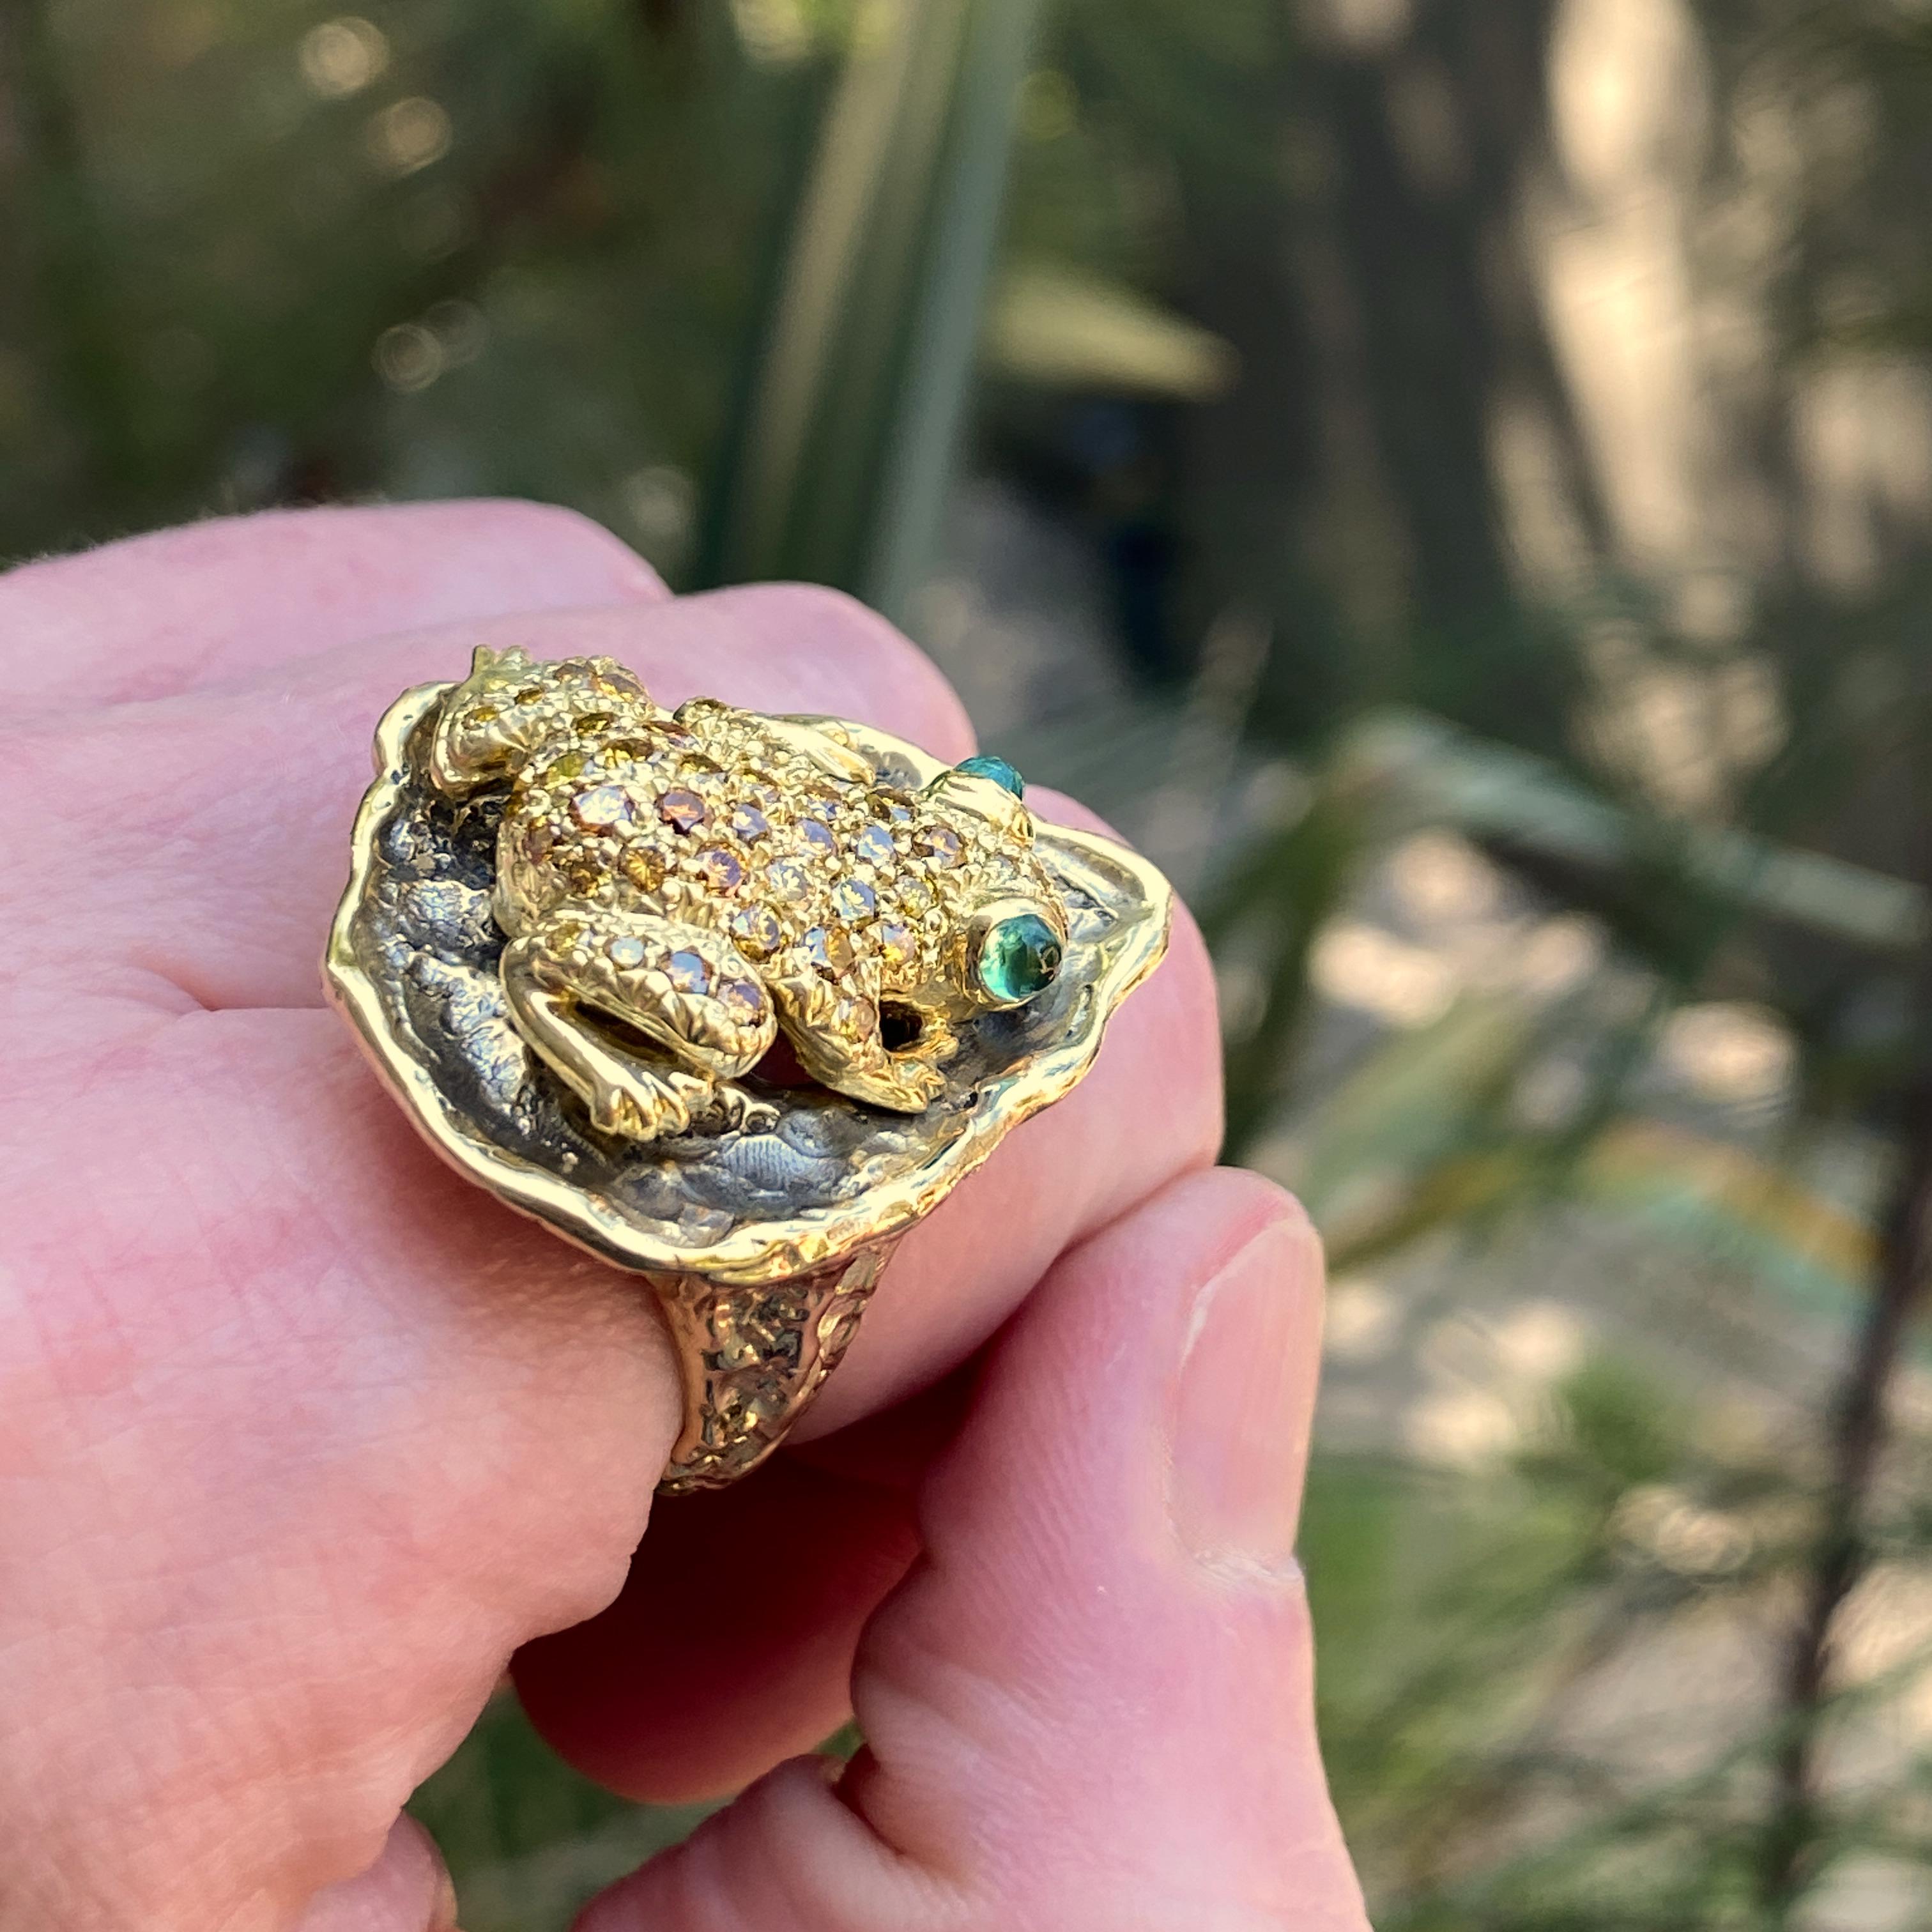 This frog has found herself the perfect perch -- a lily pad of 18 karat yellow gold fashioned just for her by Eytan Brandes.

The frog was originally a small 18 karat gold brooch, custom-made by a Washington jeweler in 2001.  She has bulging bright